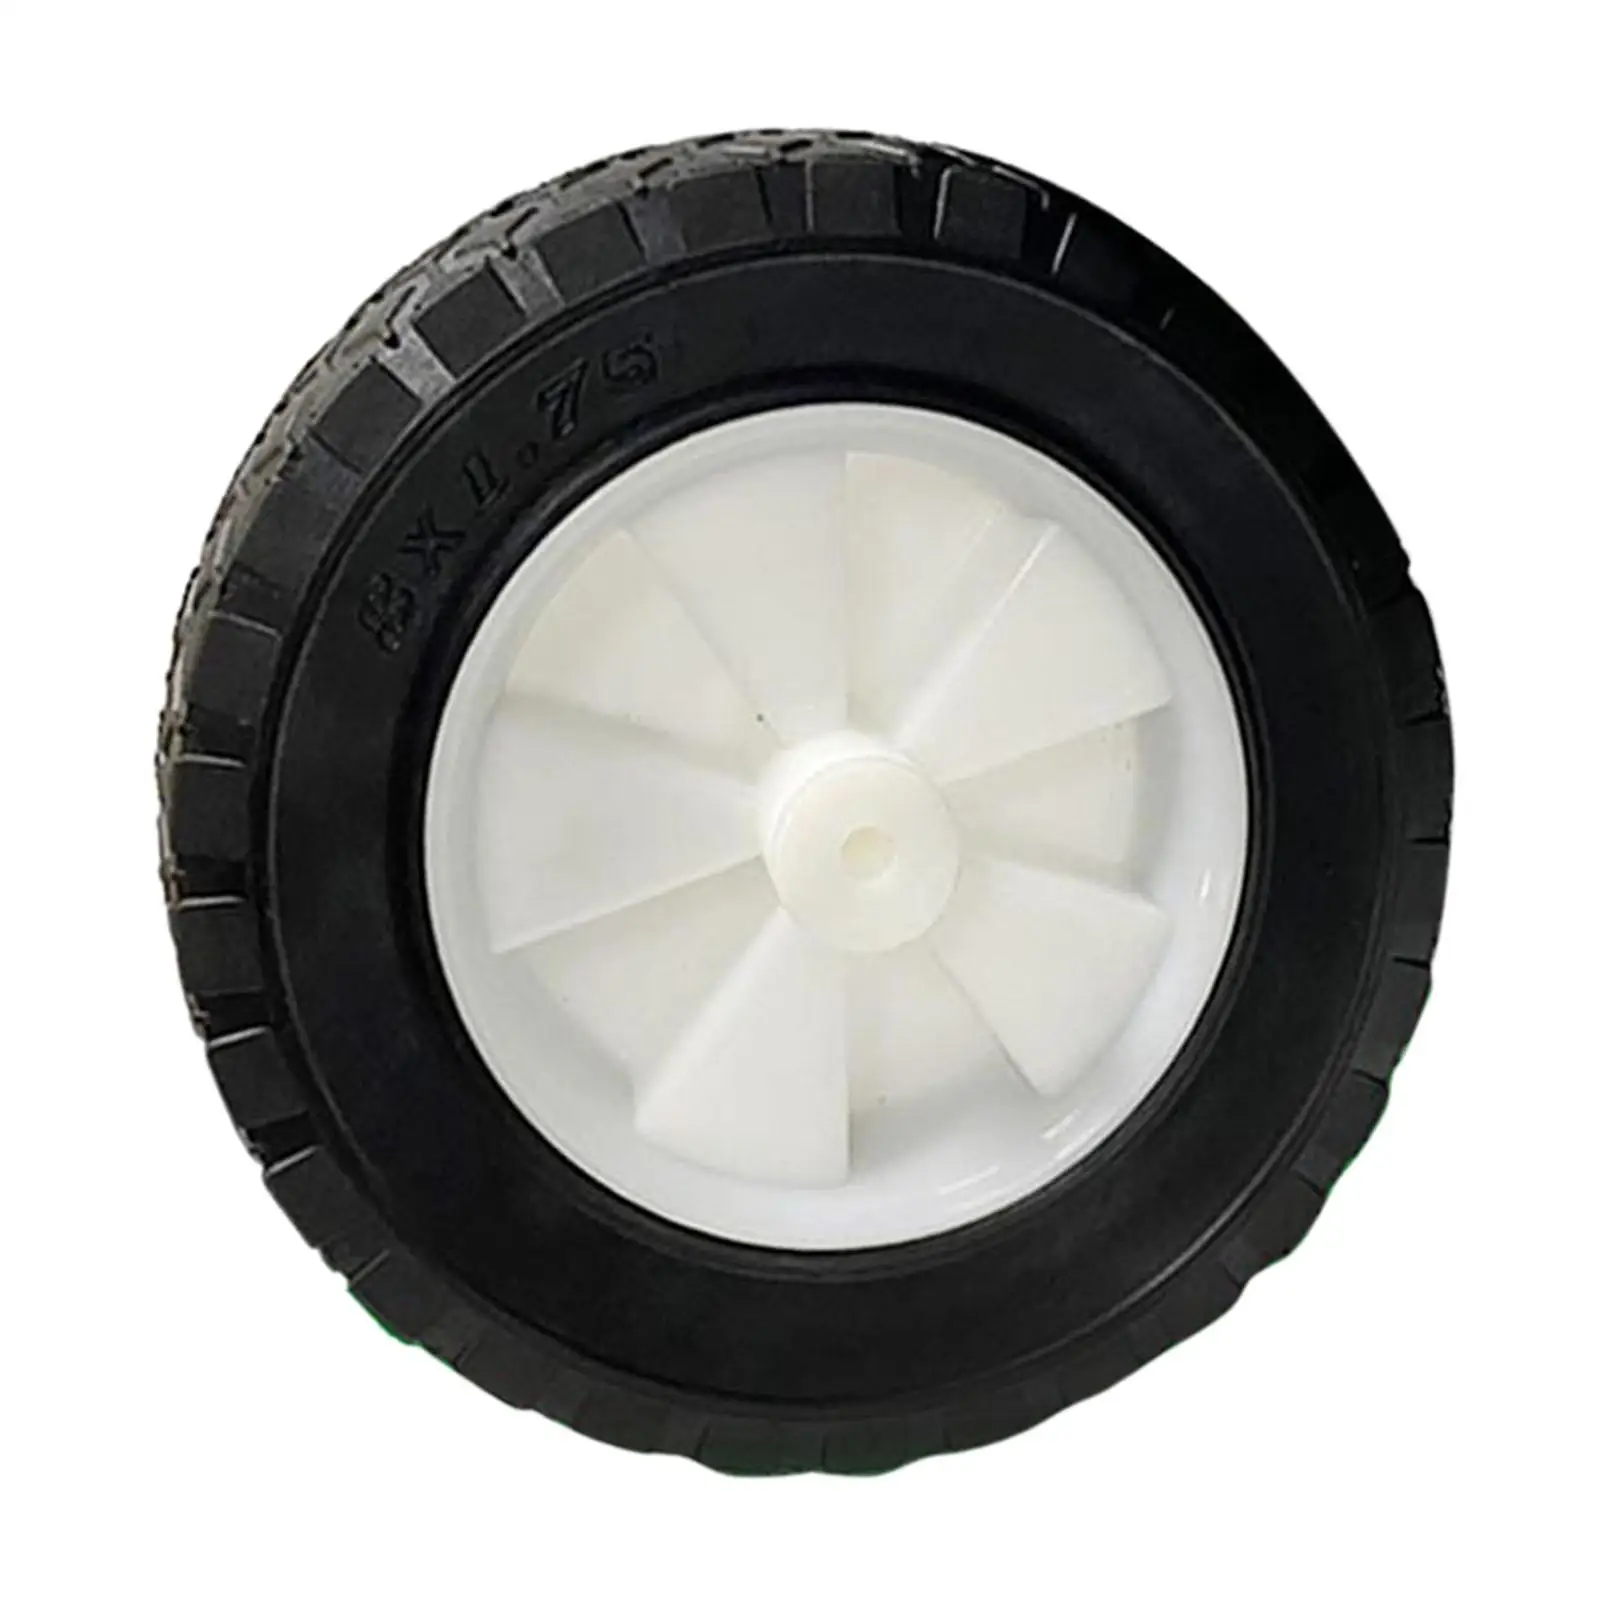 8 Inch Replacement Wheel for Wagon Lawn Cart Hand Truck High Qualiy Mower